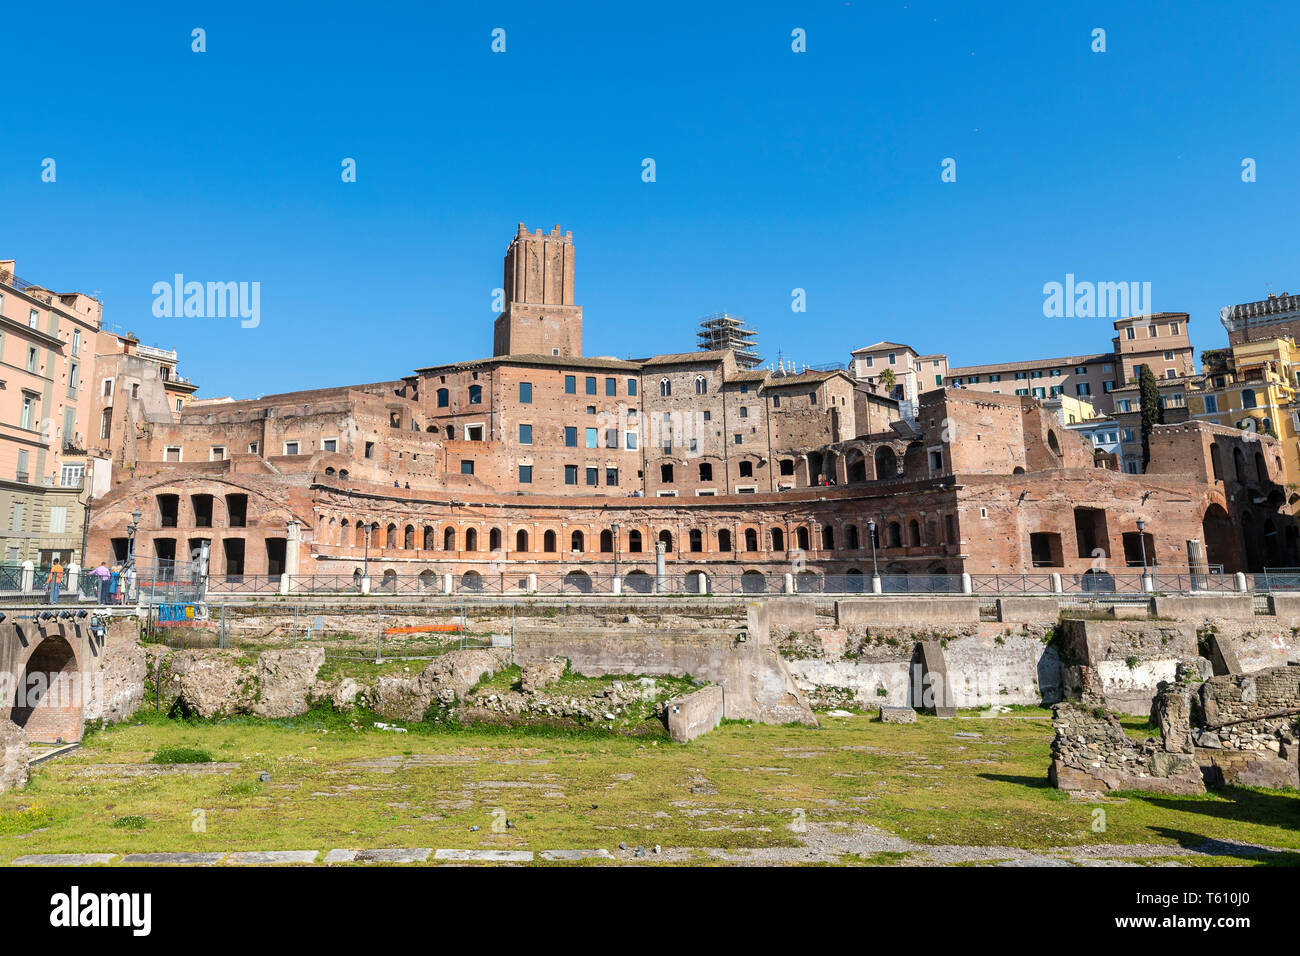 The Markets of Trajan constitute an extensive complex of Roman buildings in the city of Rome, on the slopes of the Quirinal hill. Stock Photo